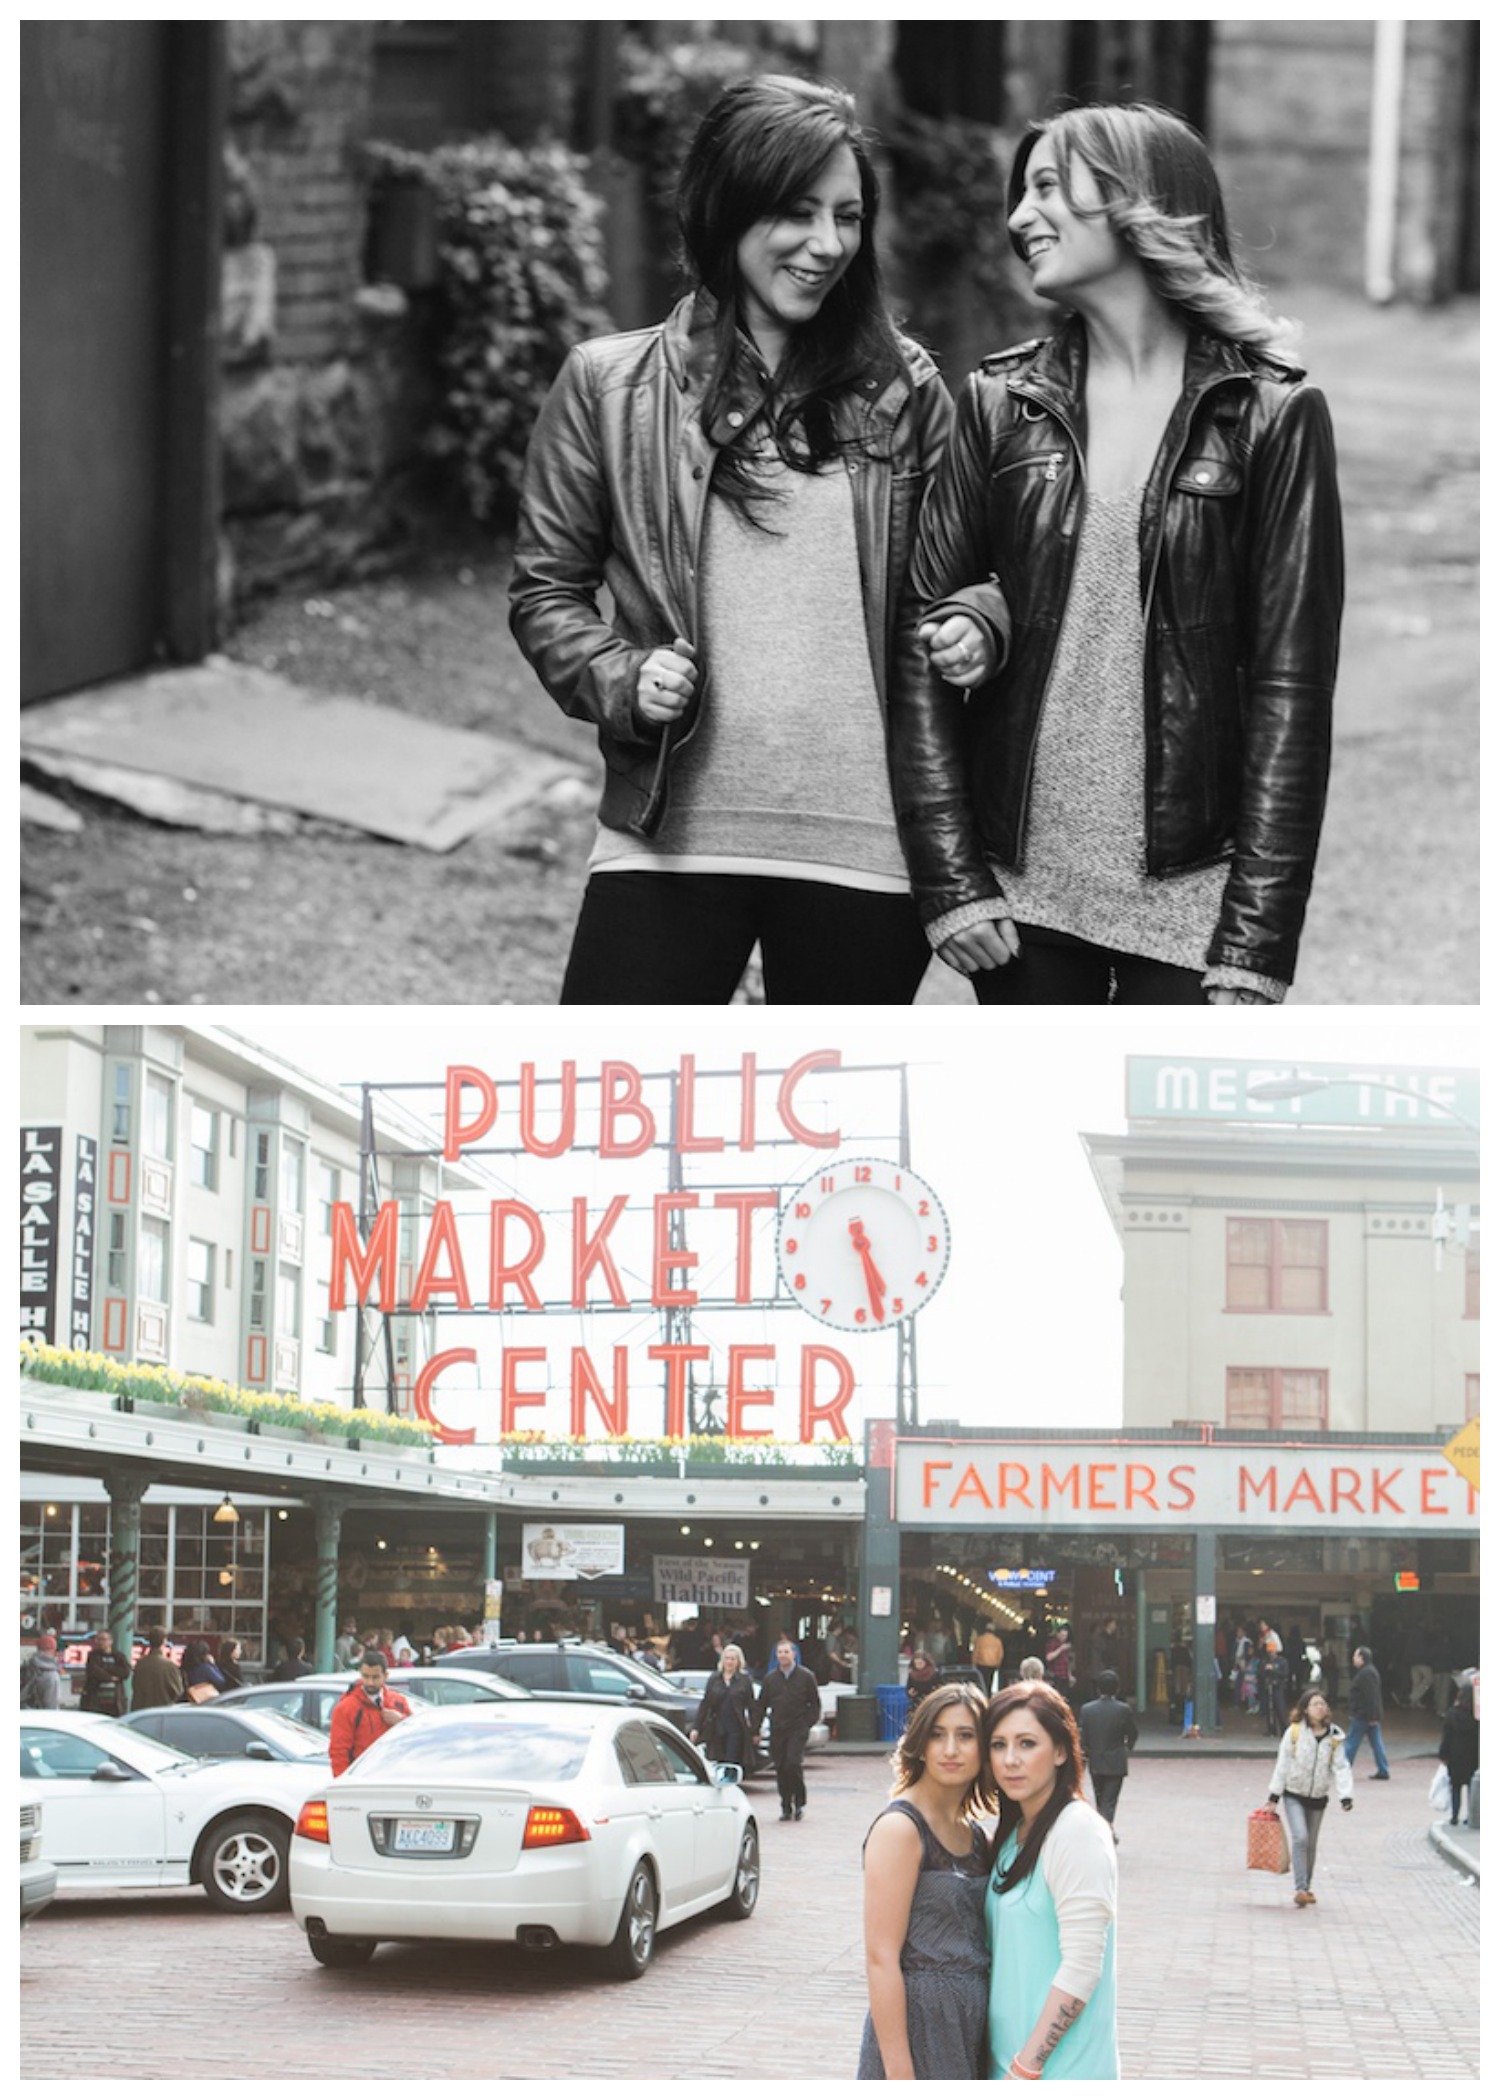  A must-have shot outside the iconic Public Market sign.  